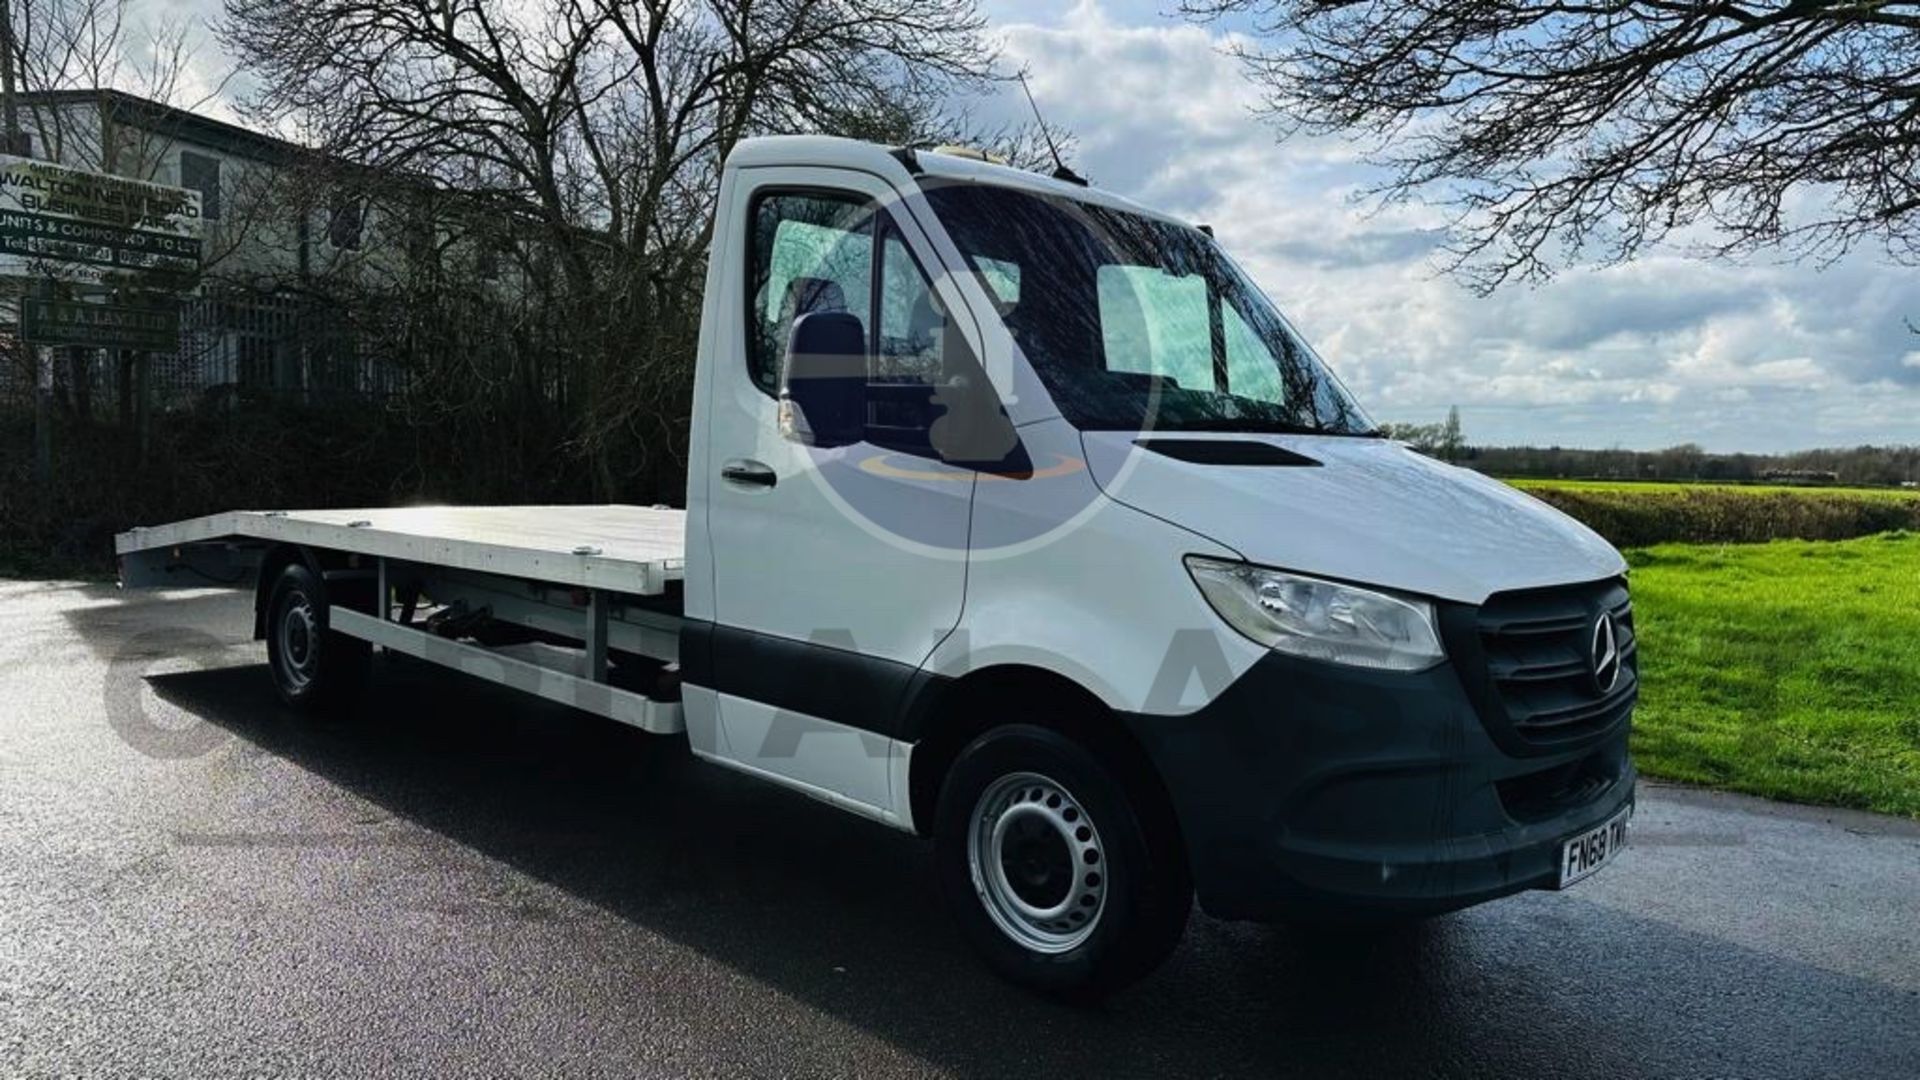 MERCEDES SPRINTER 314CDI "LWB RECOVERY TRUCK" 2019 MODEL - 1 OWNER - NEW BODY FITTED WITH ELEC WINCH - Image 2 of 37